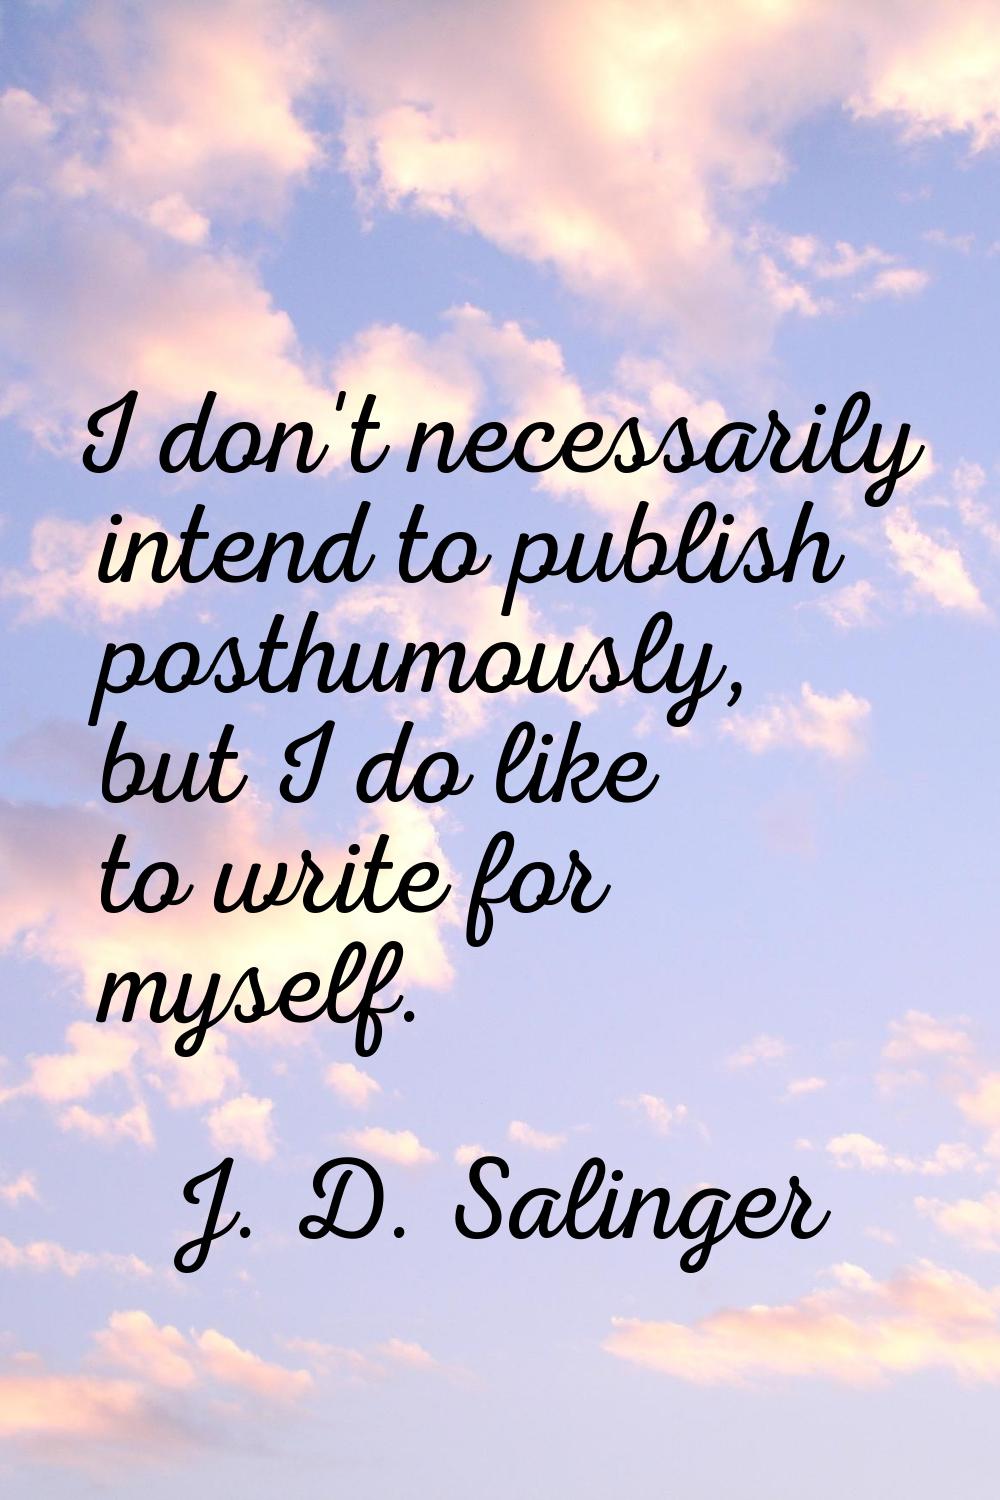 I don't necessarily intend to publish posthumously, but I do like to write for myself.